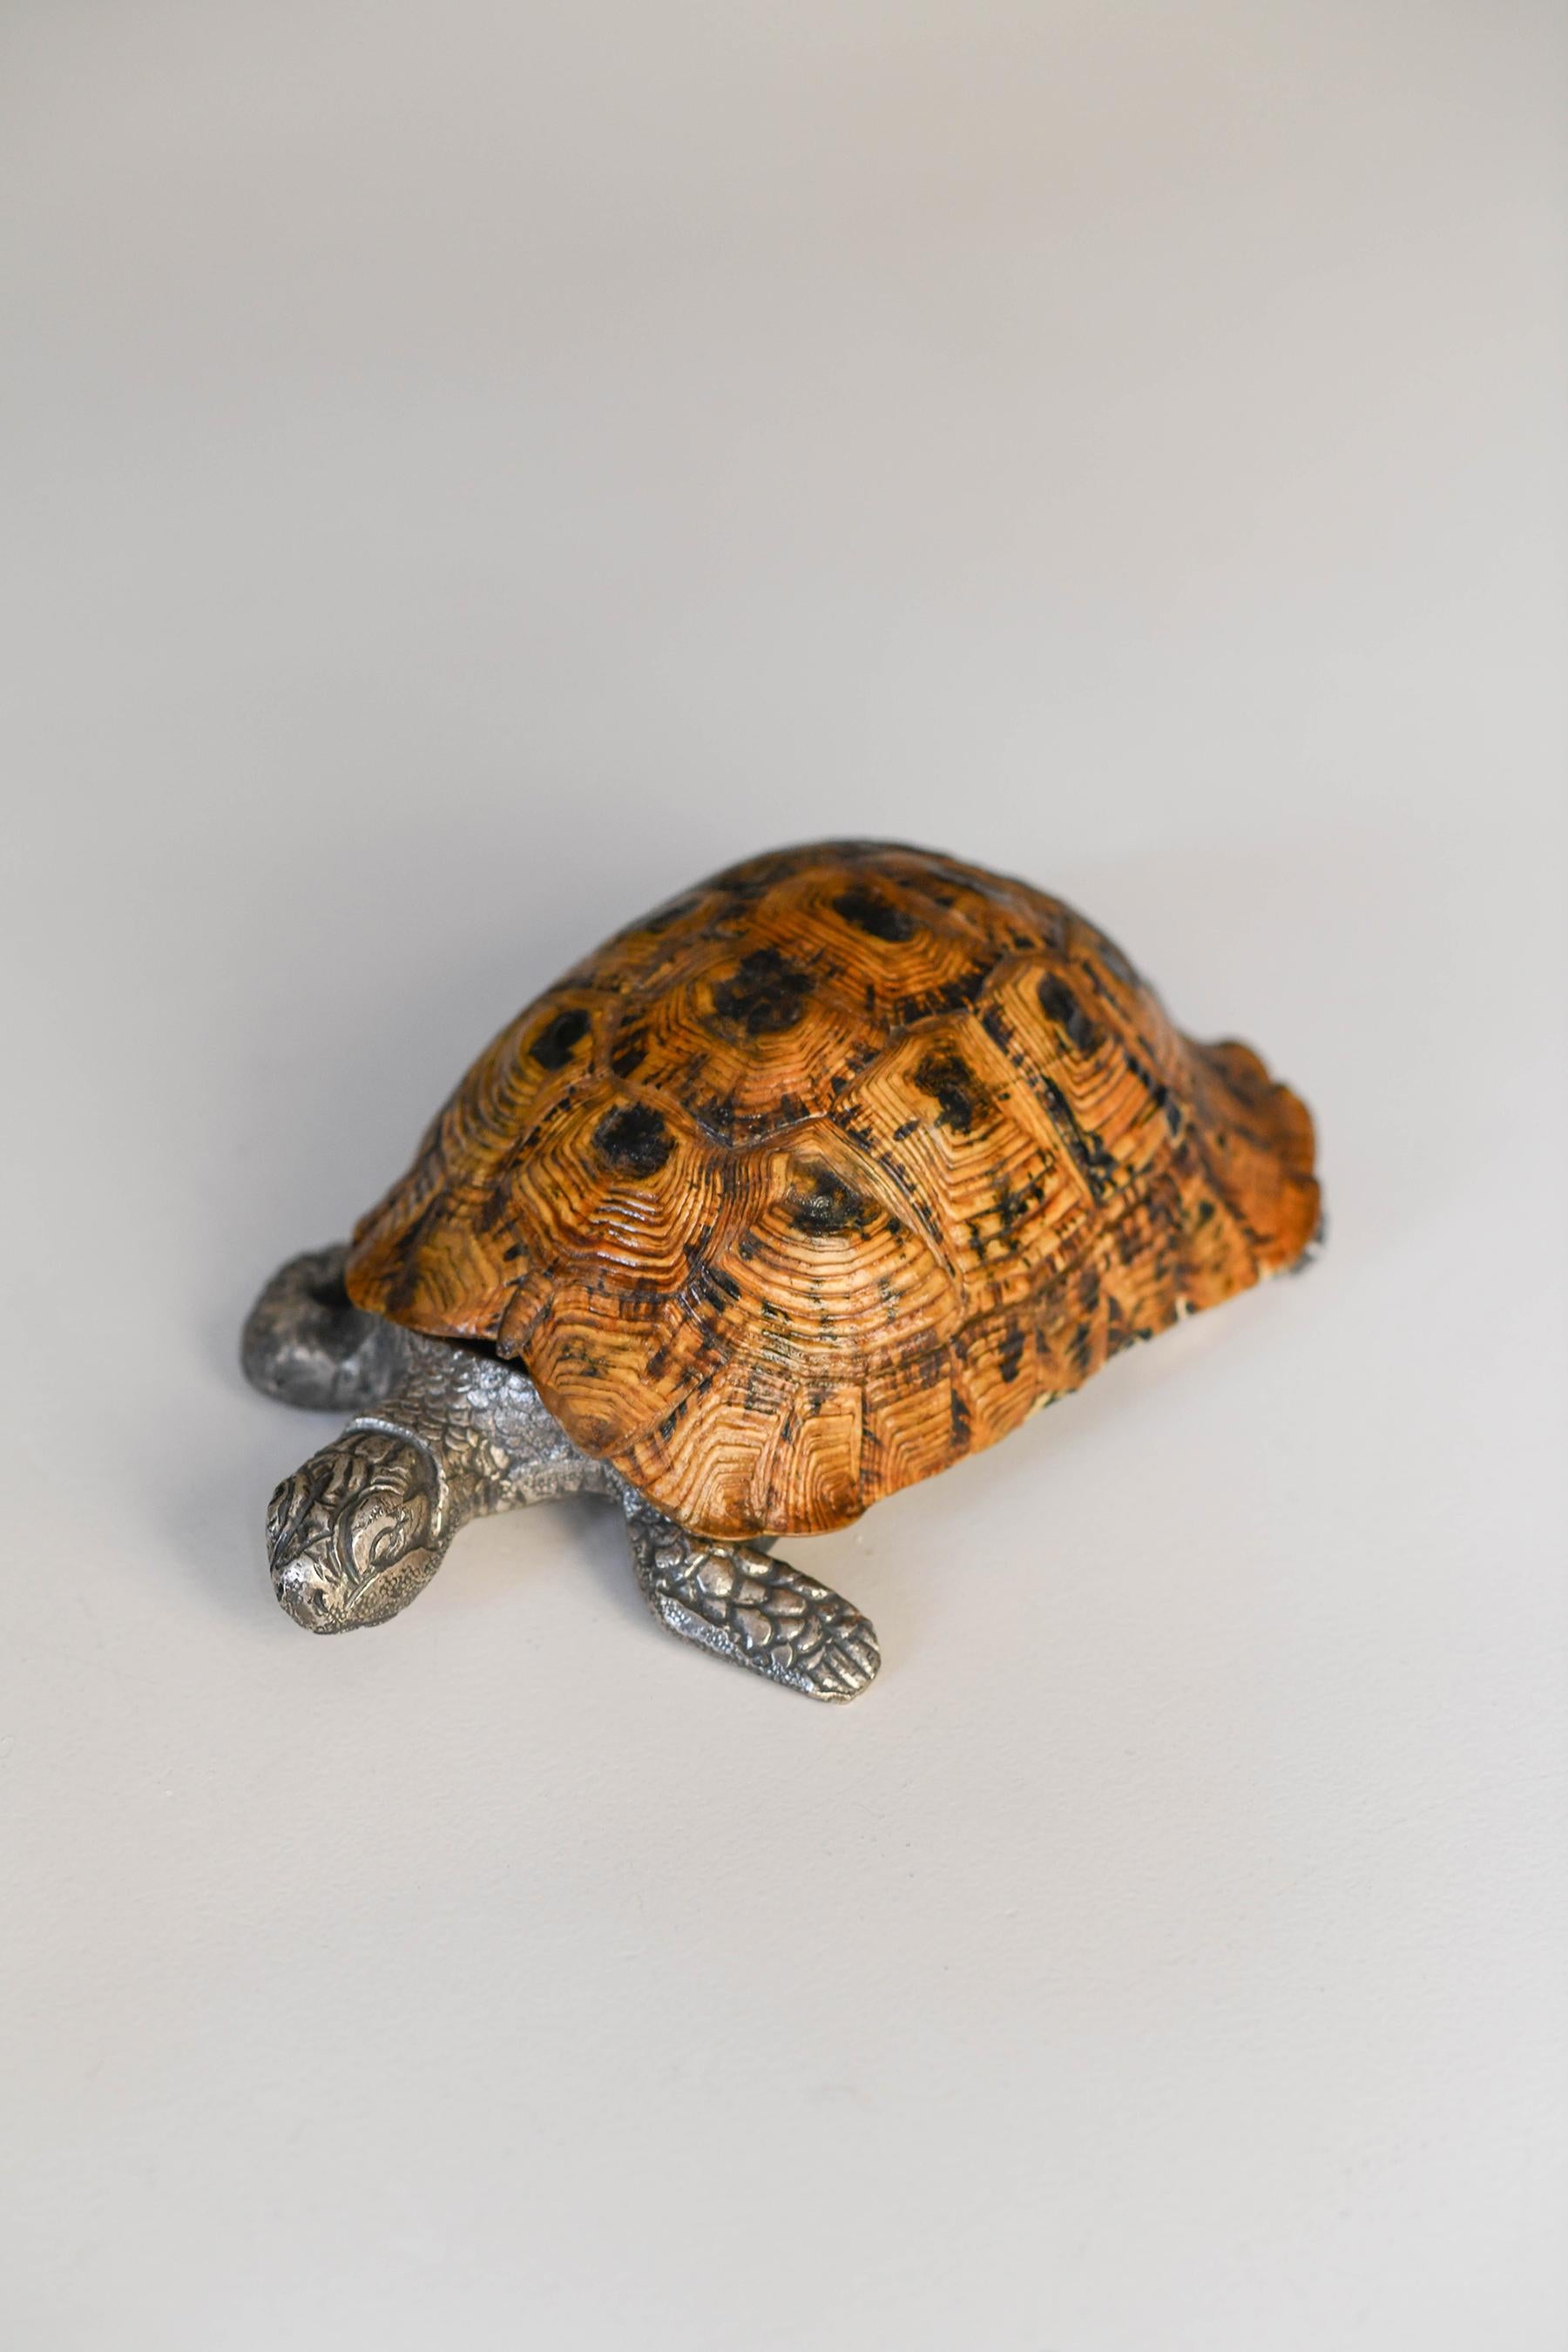 Turtle pocket emptier by Gabriella Crespi in silver metal and shell, engraved signature, 1970s.
Dimensions: 16 L x 7 H x 11 D cm